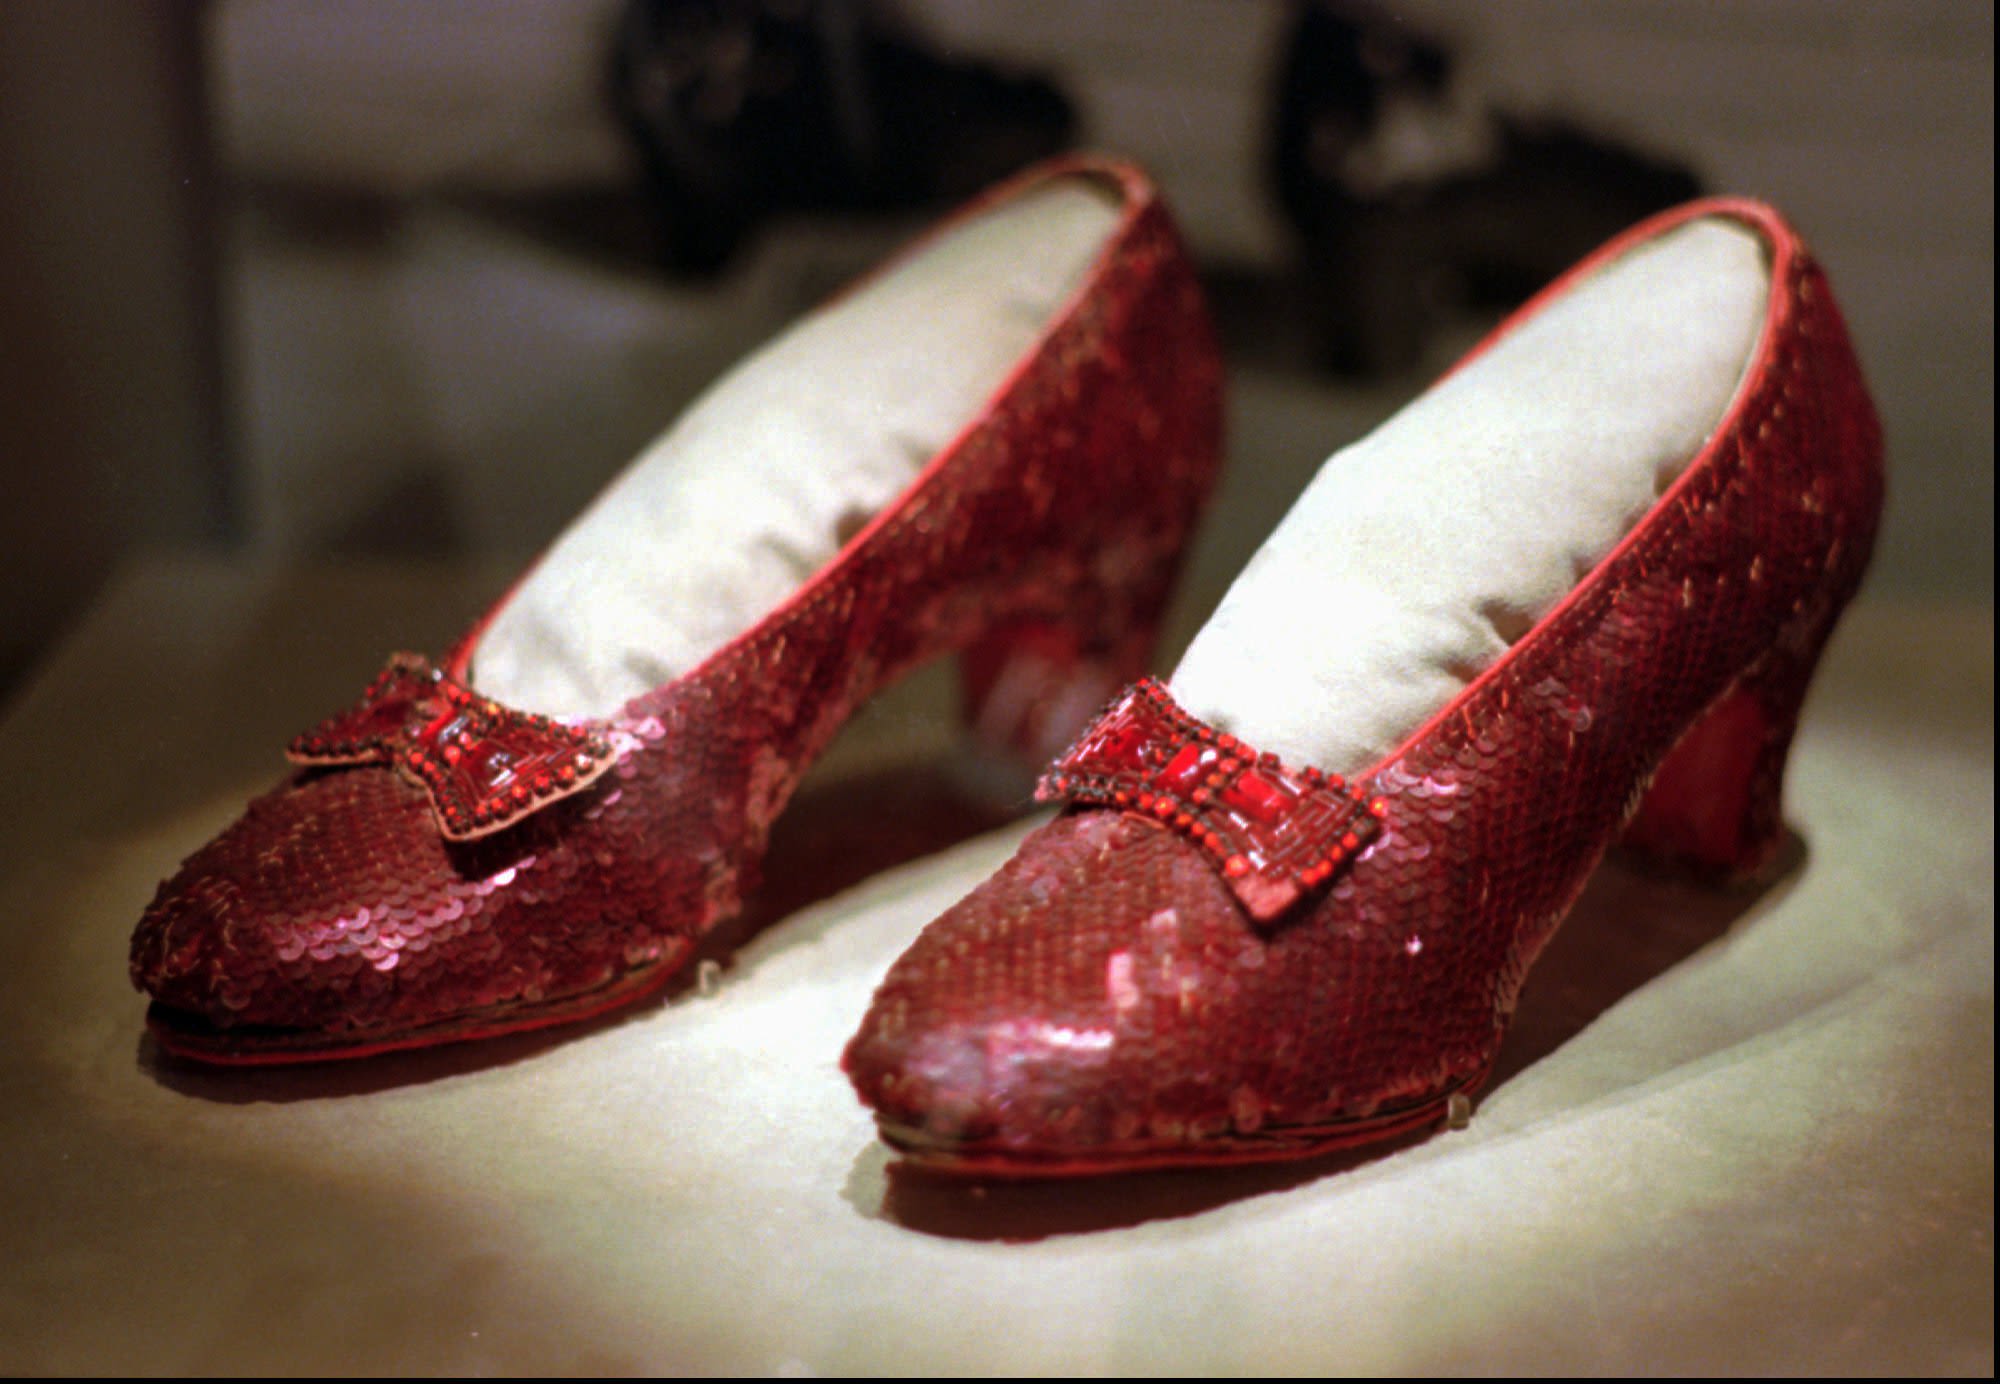 biology Woman fluent Stolen 'Wizard of Oz' ruby slippers found 13 years later | CNN